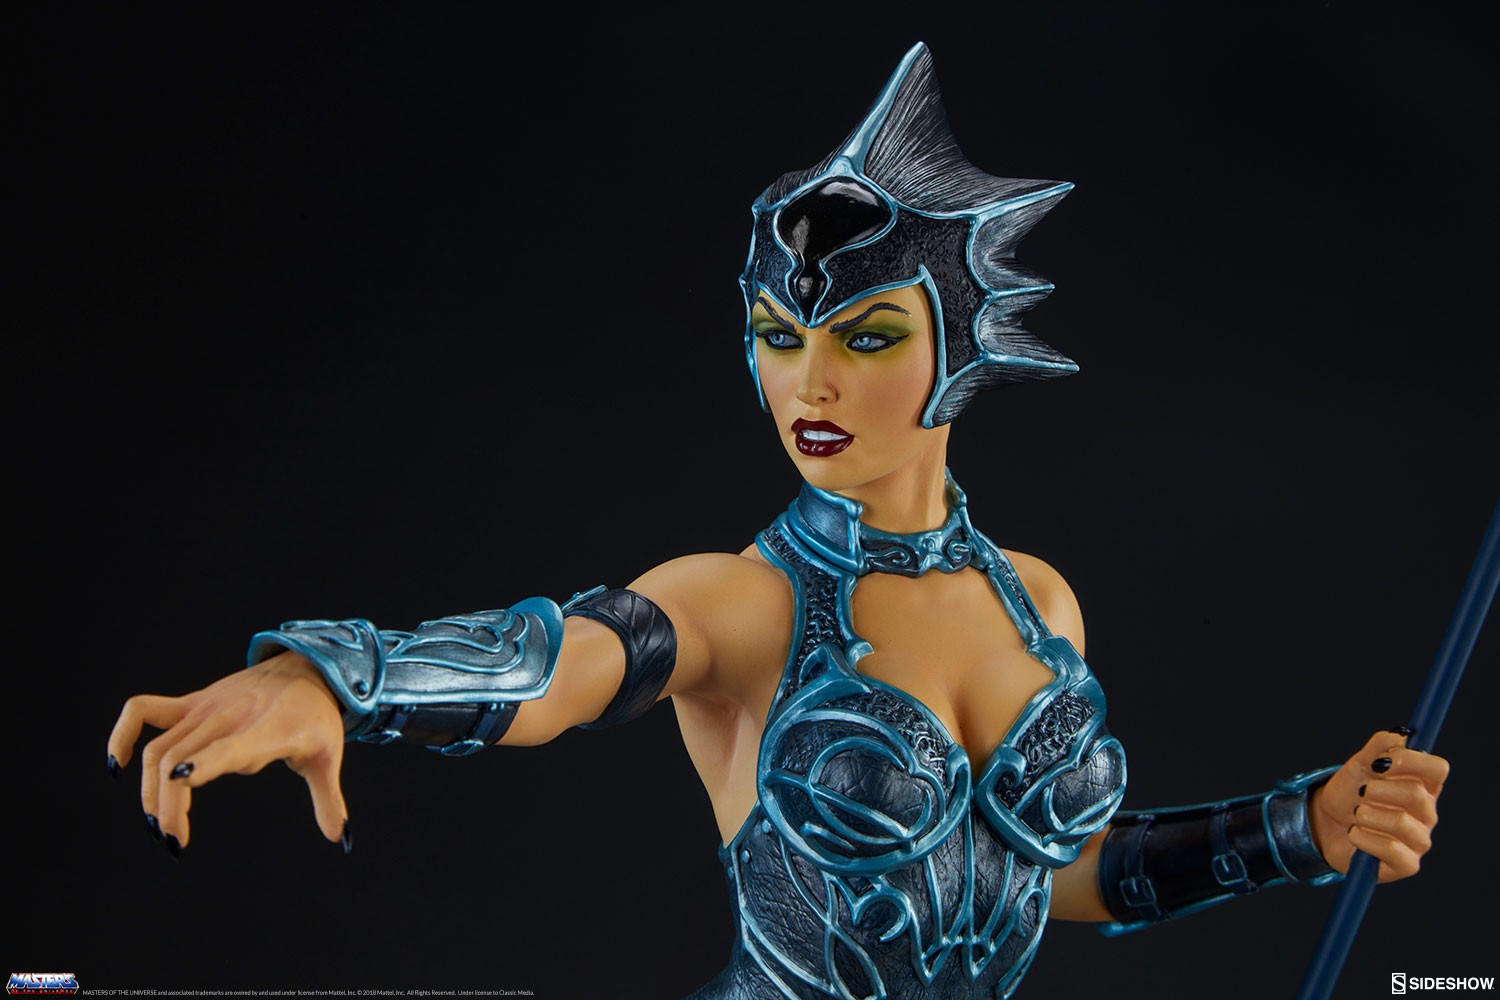 Evil-Lyn Classic Exclusive Edition View 15